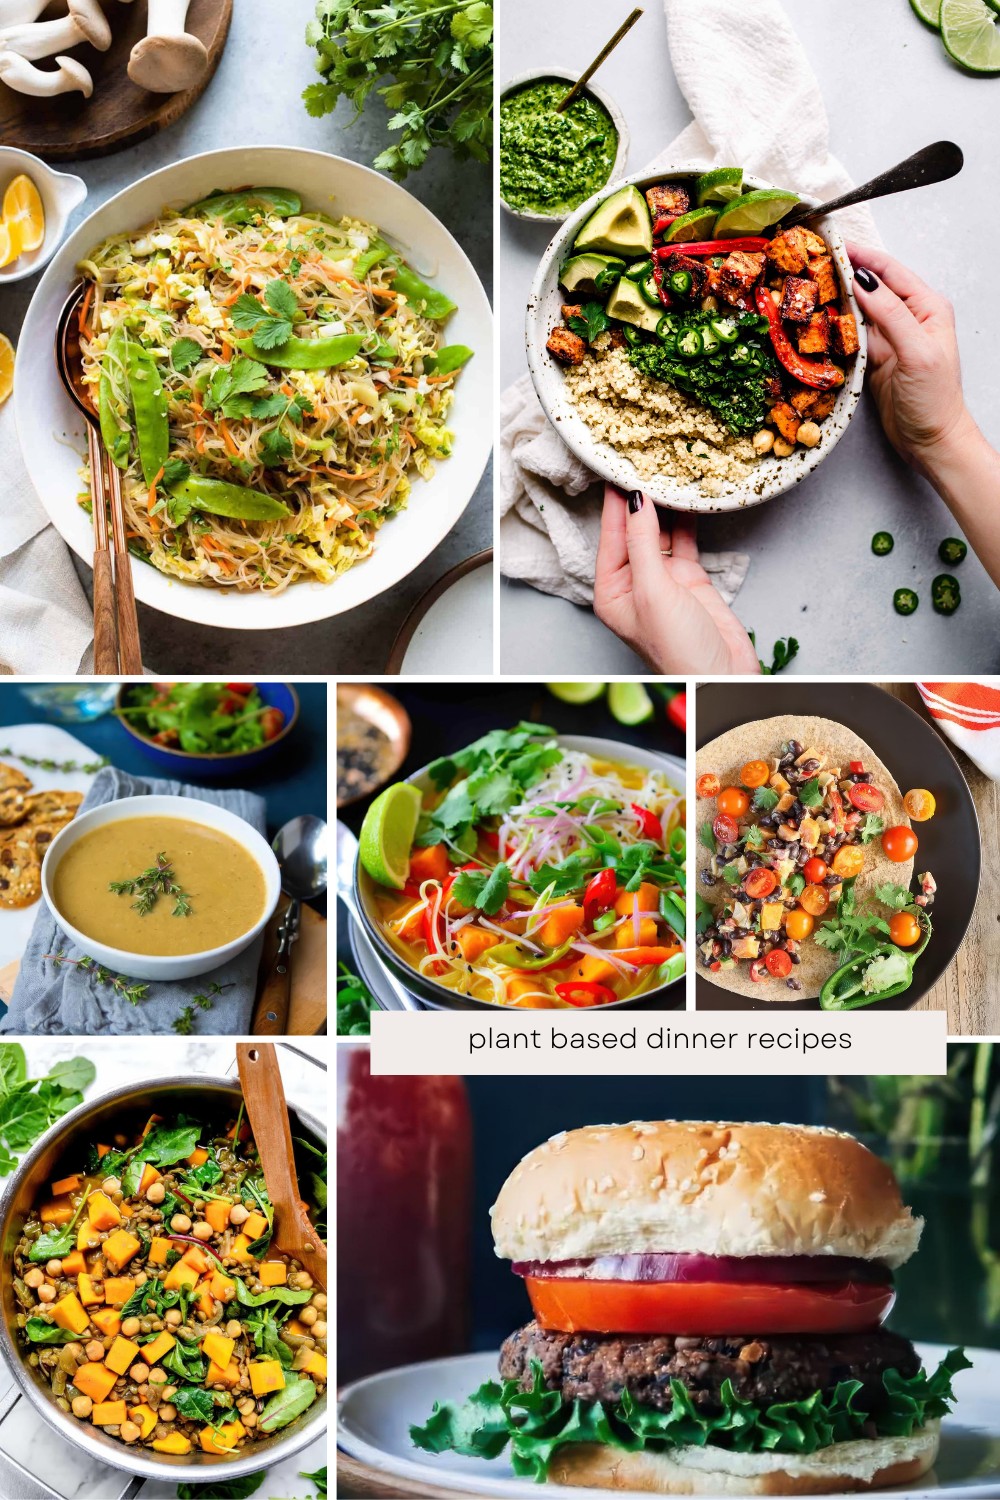 Going plant-based doesn’t mean living on salads forever. Explore these hearty and flavorful meatless meals that even picky eaters will love! Perfect for family dinners, these recipes are packed with nutrients and taste amazing. 🥦🍛🍆 #PlantBasedDelights #MeatlessMeals #HealthyEats







